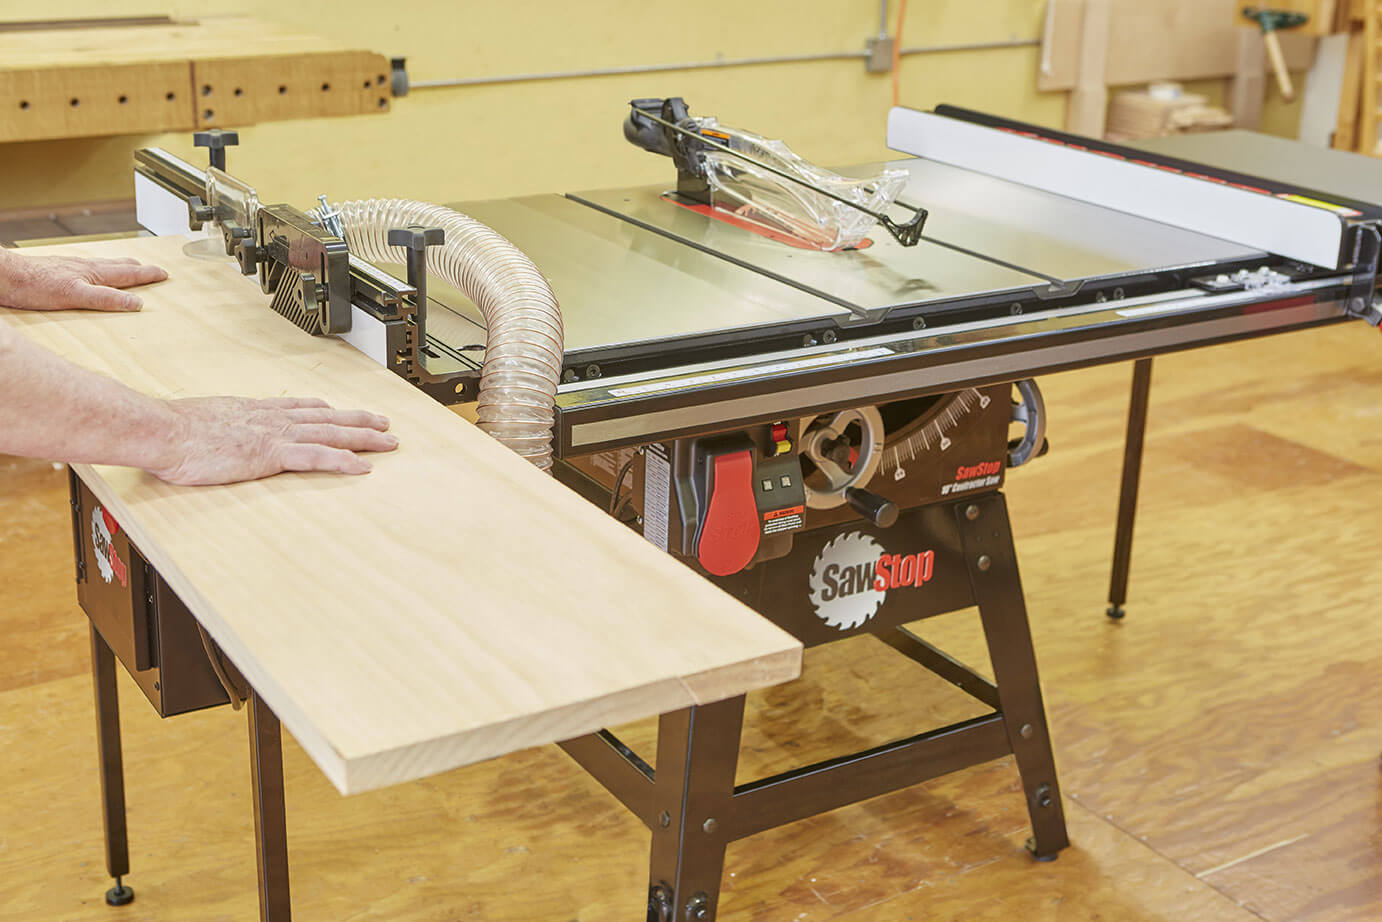 10 5 HP 240V Cabinet Table Saw with Built-in Router Table